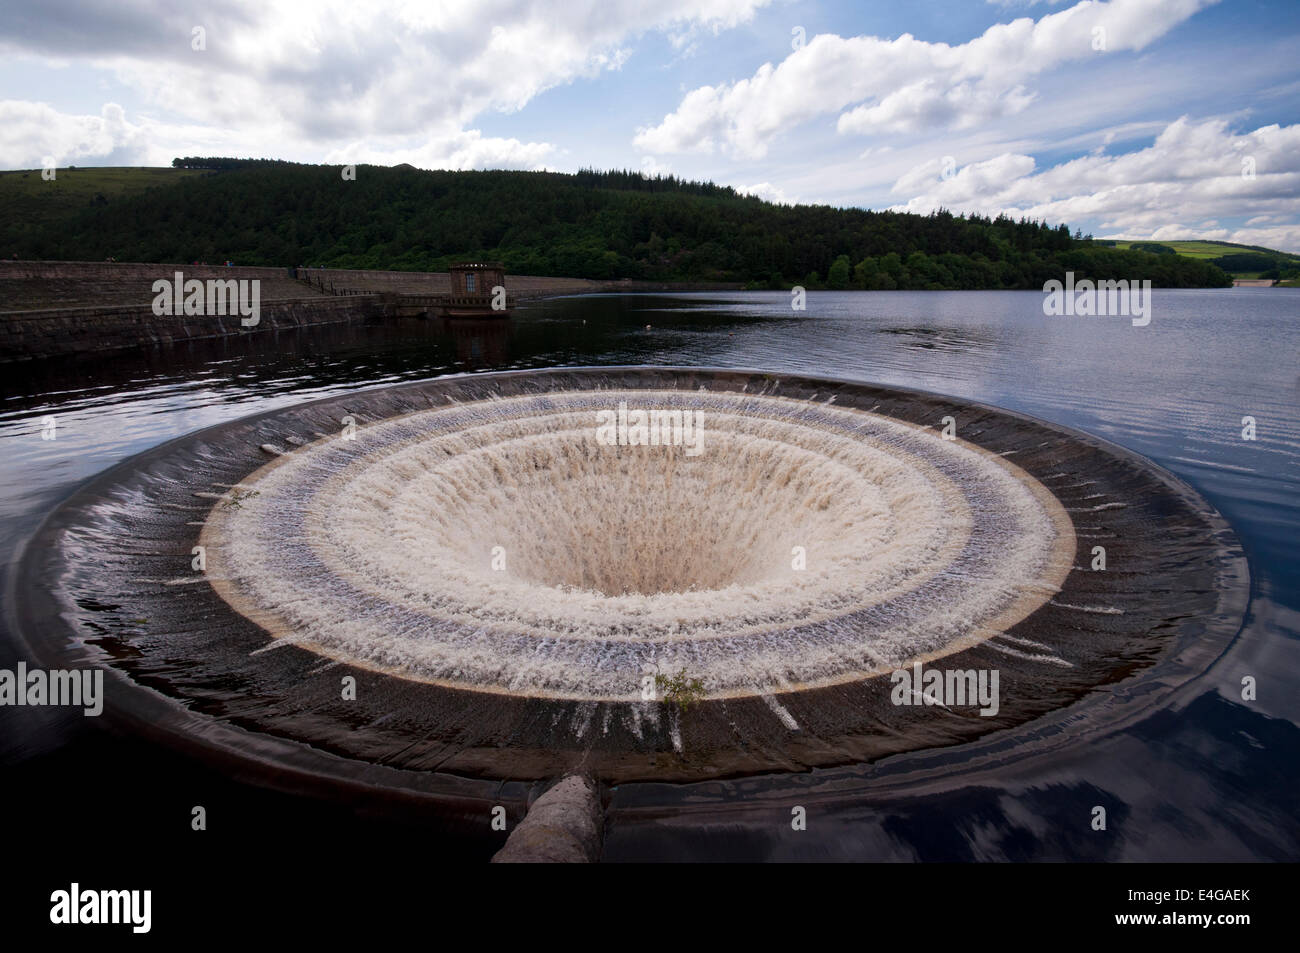 Overflow or Bellmouth, Ladybower Reservoir in the Peak District National Park. The reservoir has two of these overflows. Stock Photo